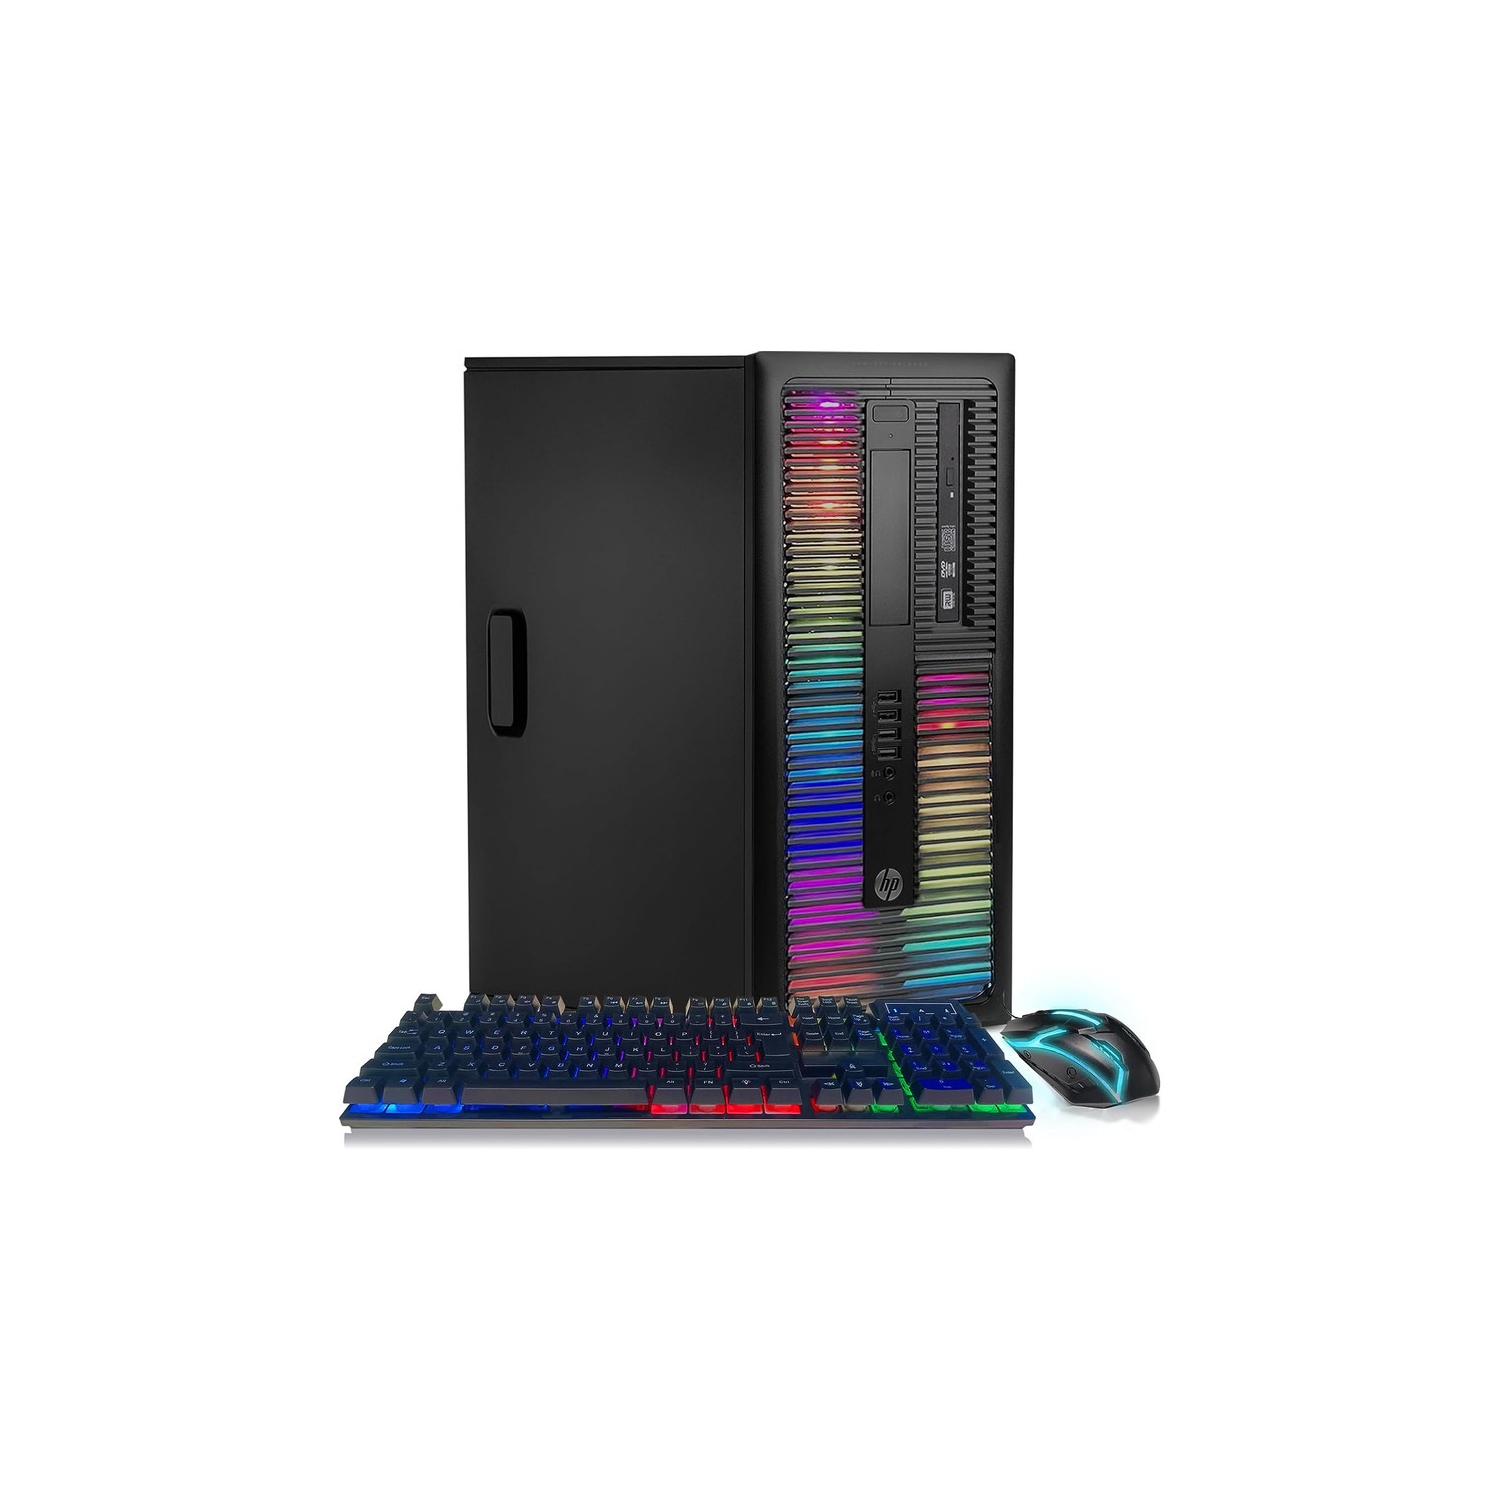 HP RGB Gaming Desktop Computer, Intel Quad Core I5 up to 3.6GHz, Radeon RX 550 4G, 16GB Ram, 1T SSD, RGB Keyboard & Mouse, 600M WiFi & BT 5.0, W10P64 - Refurbished Excellent